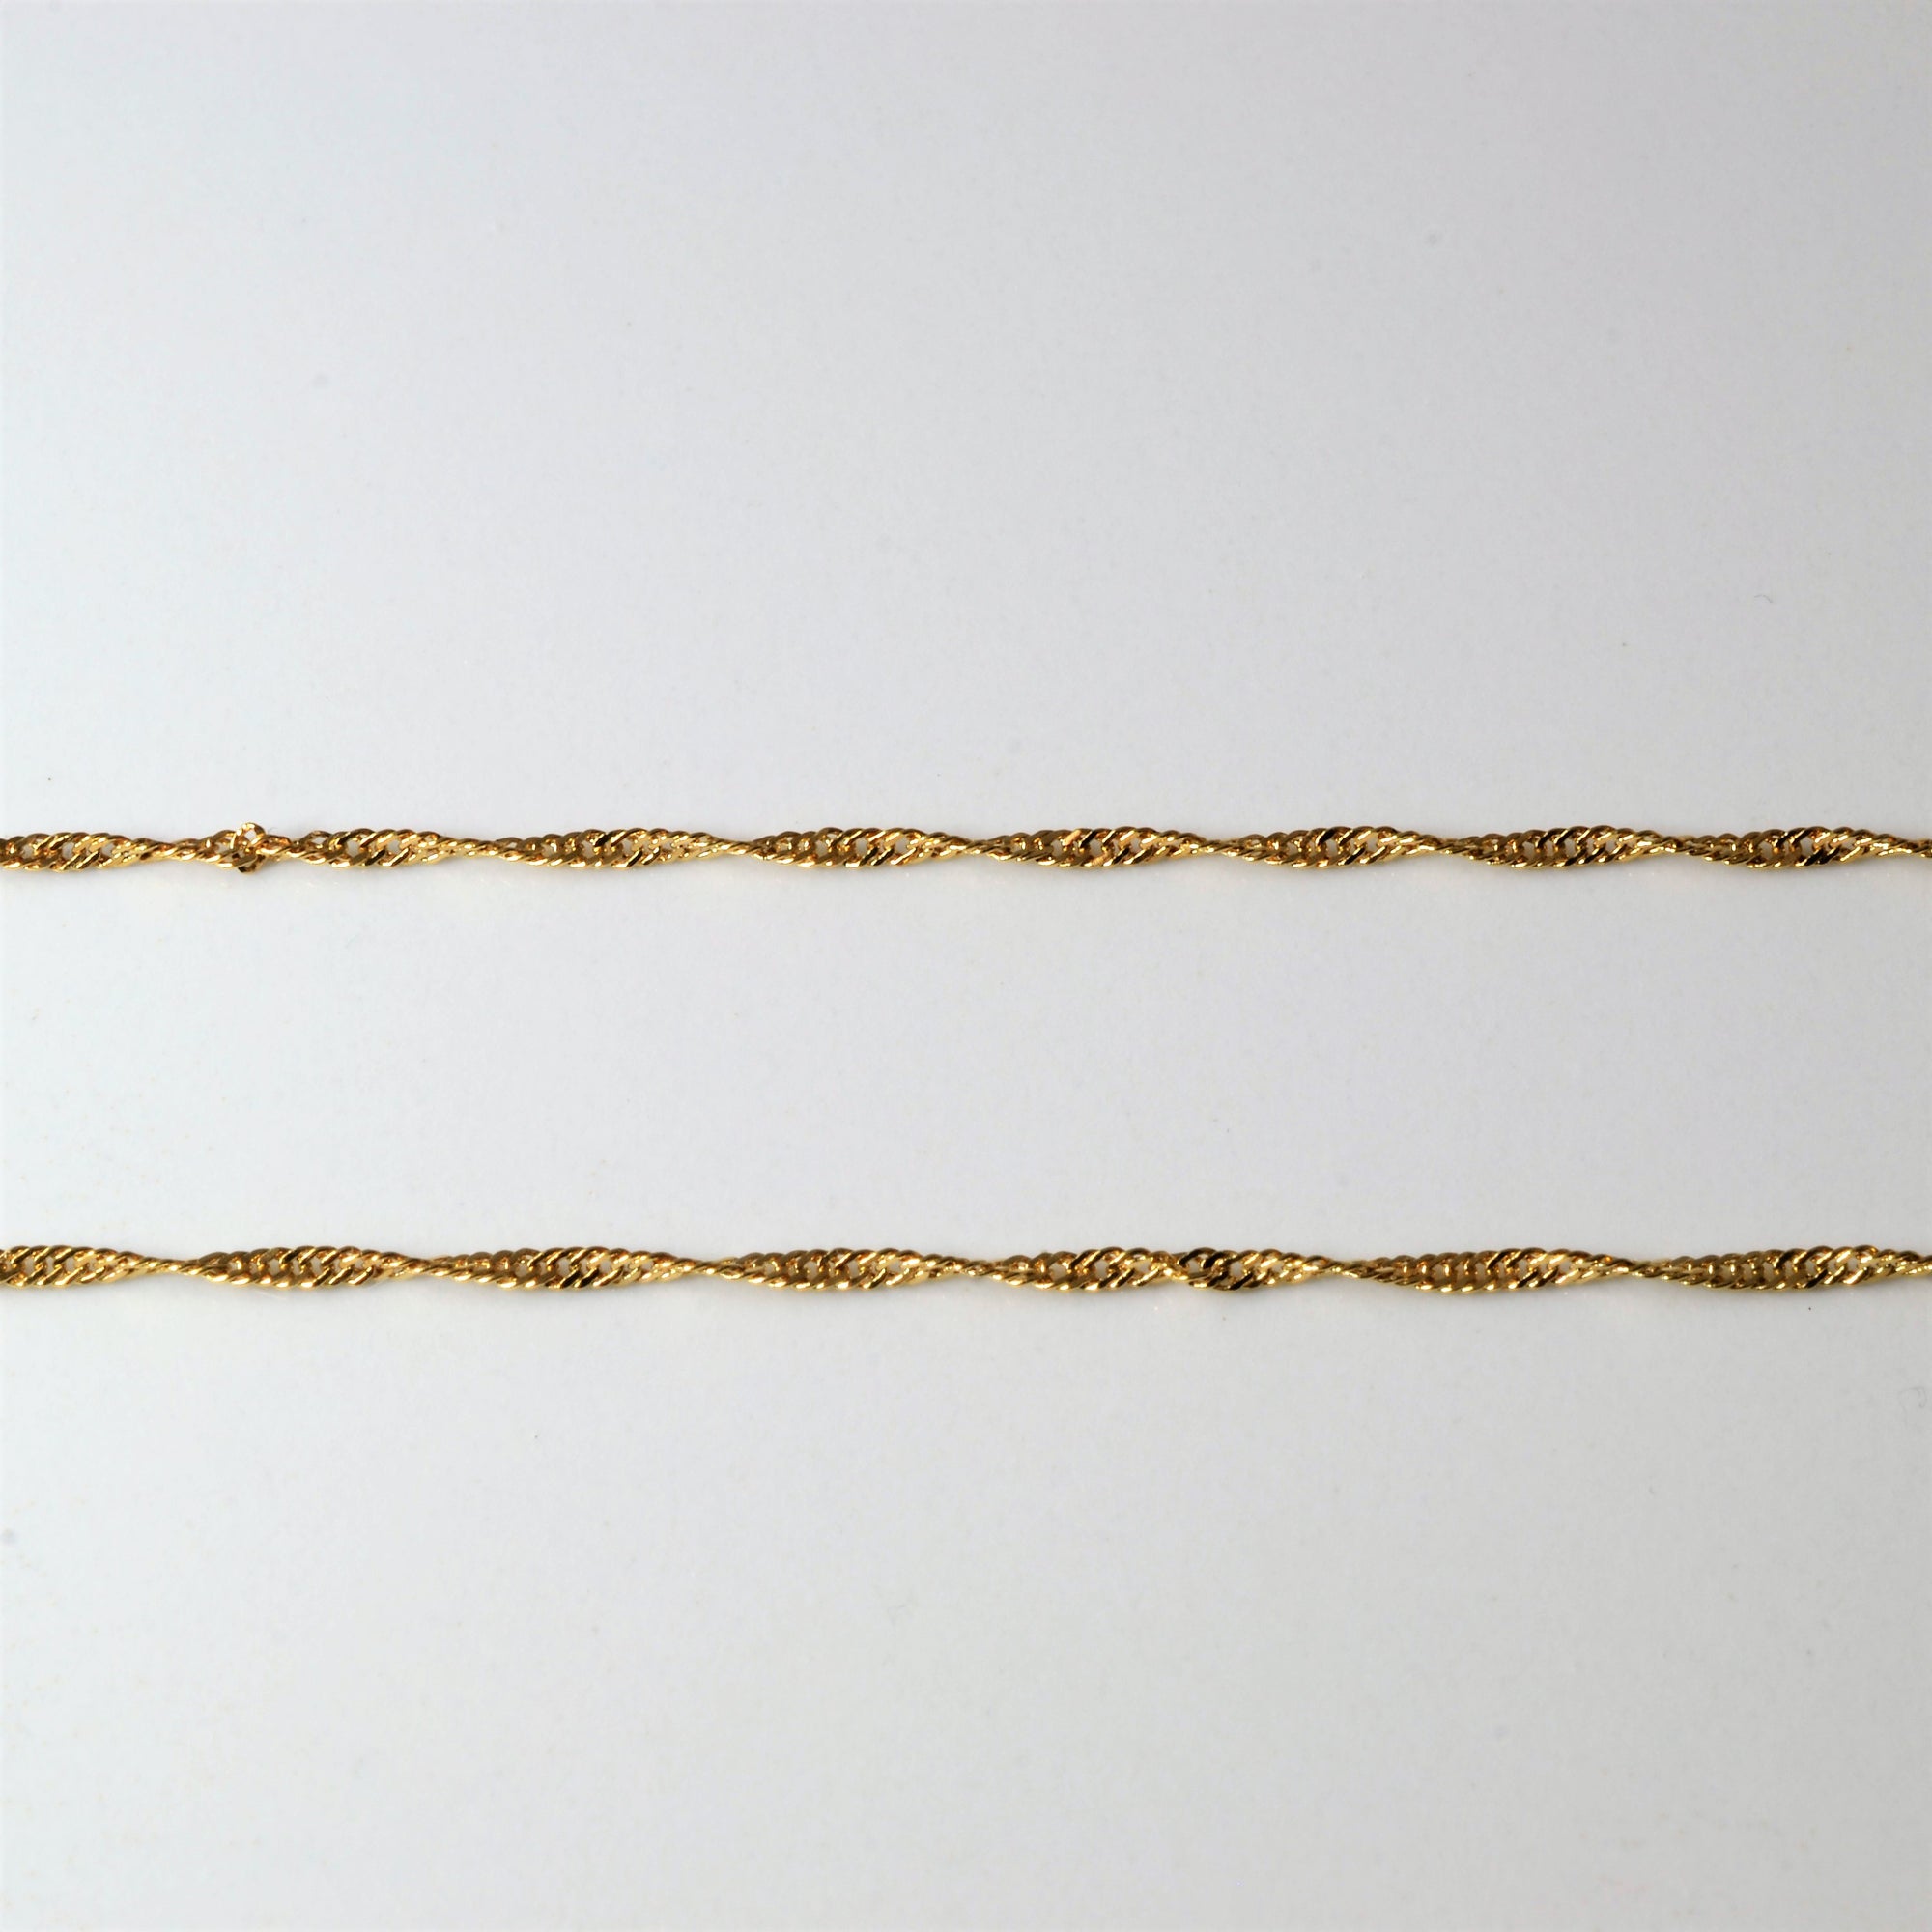 Yellow Gold Letter 'W' Necklace | 15